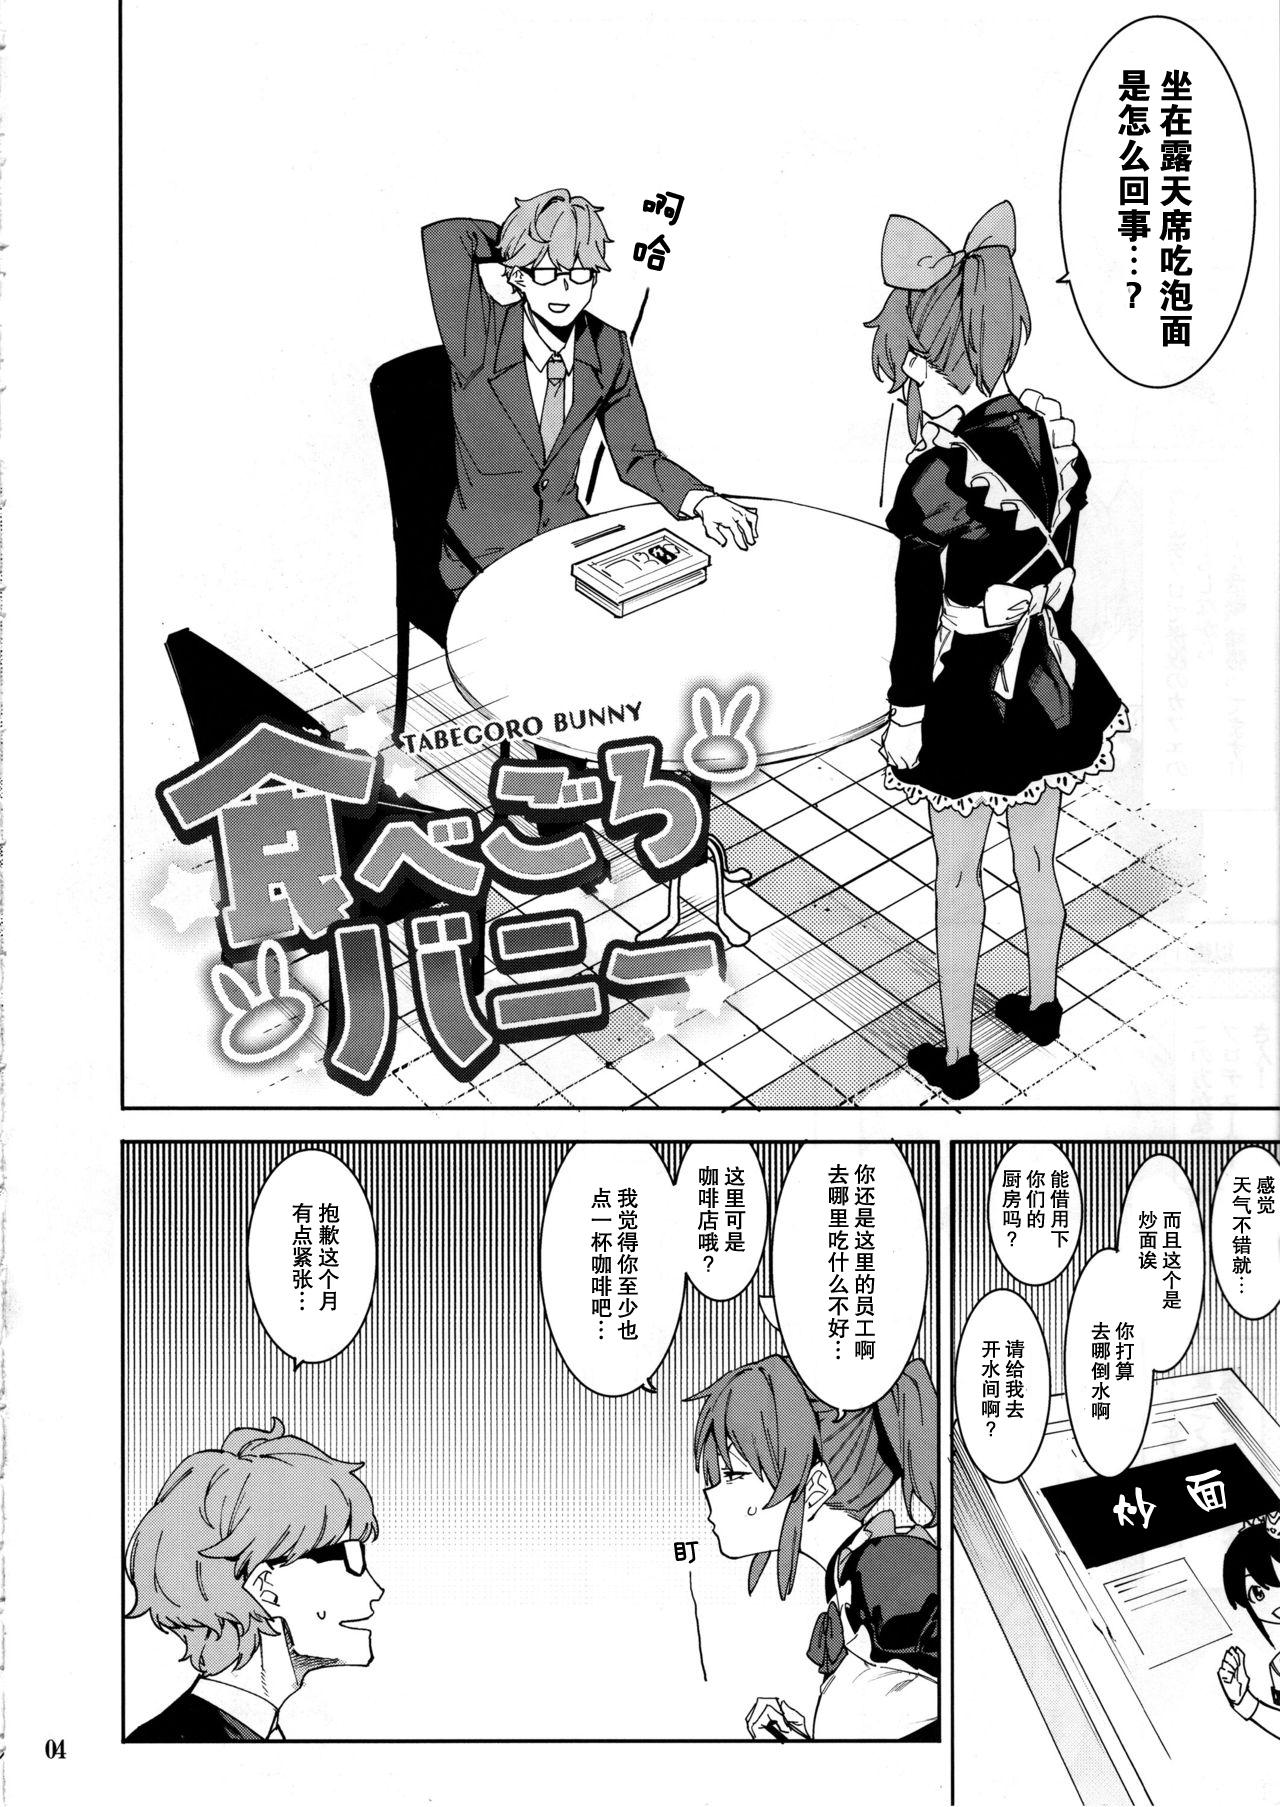 Monster Tabegoro Bunny - The idolmaster Trimmed - Page 4